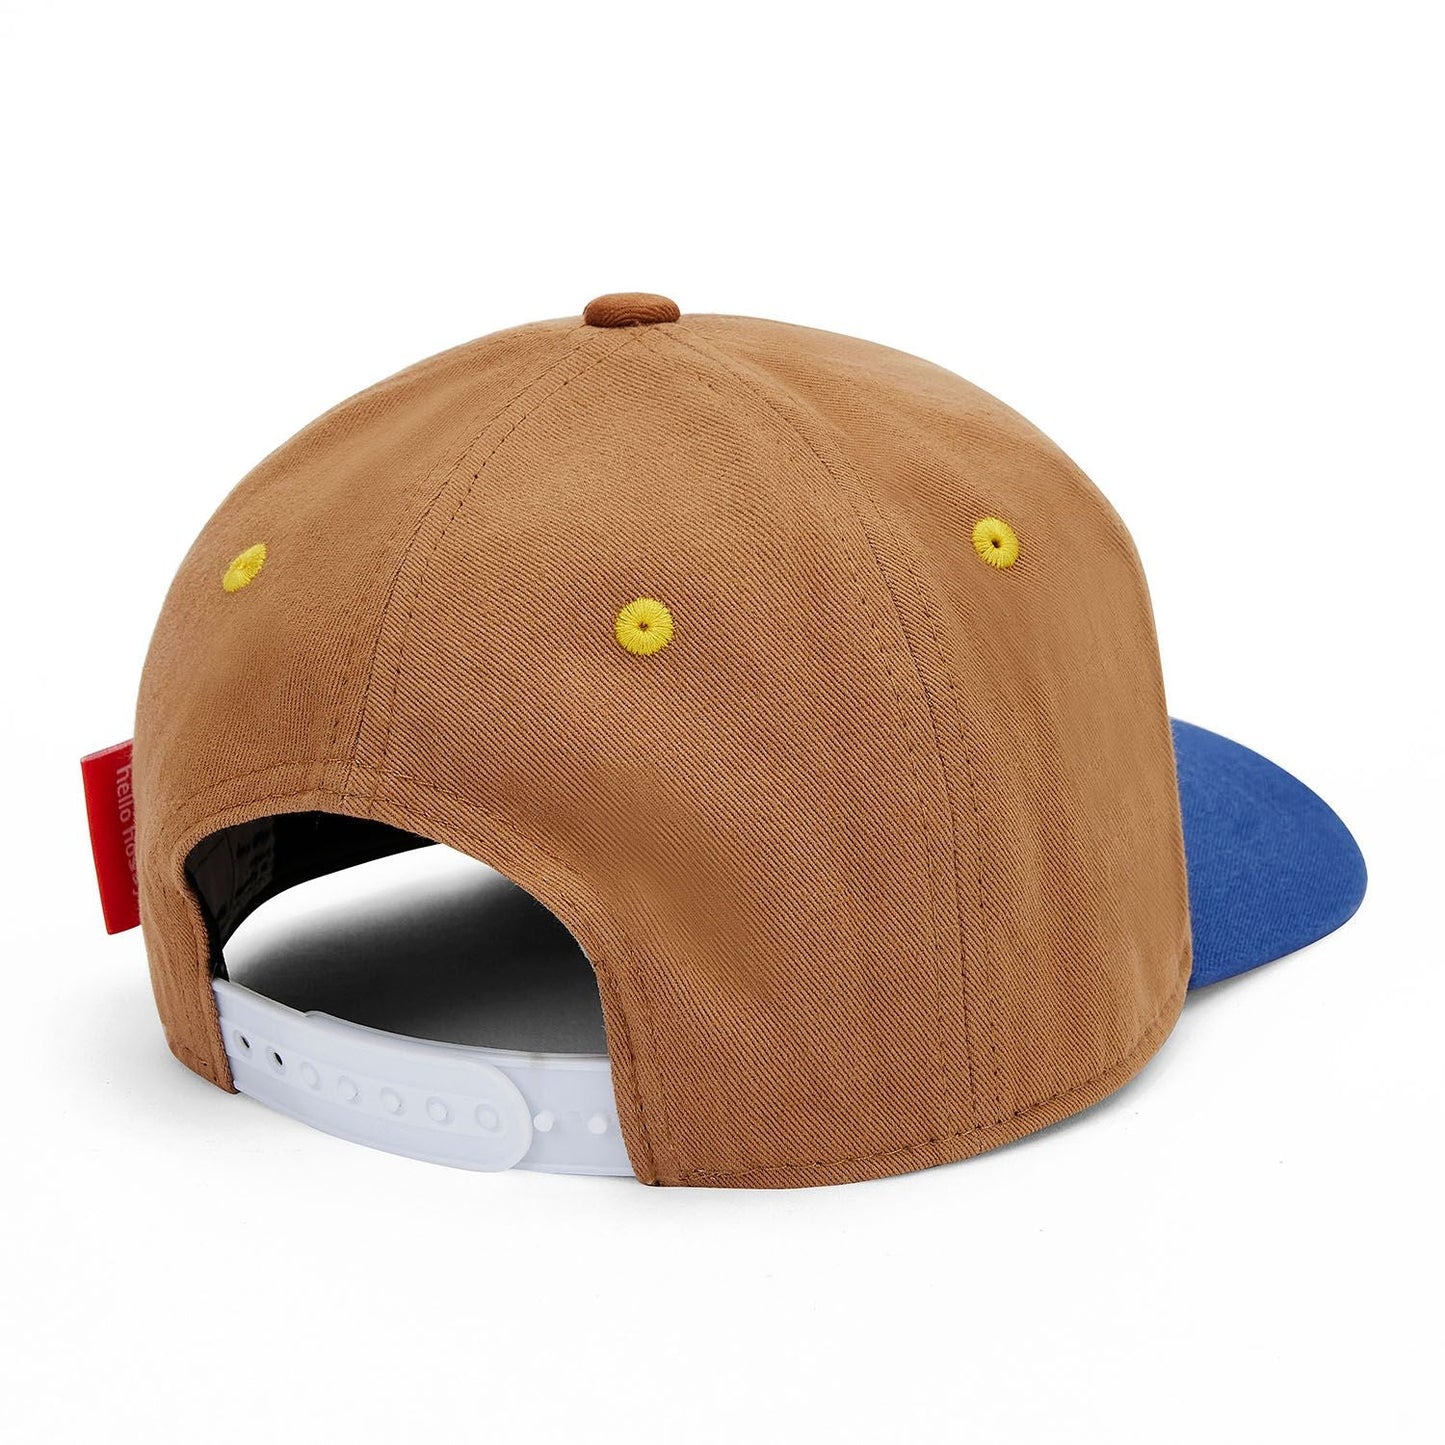 Casquette Mini Choco + 6 ans - Cool kids Only - Hello Hossy